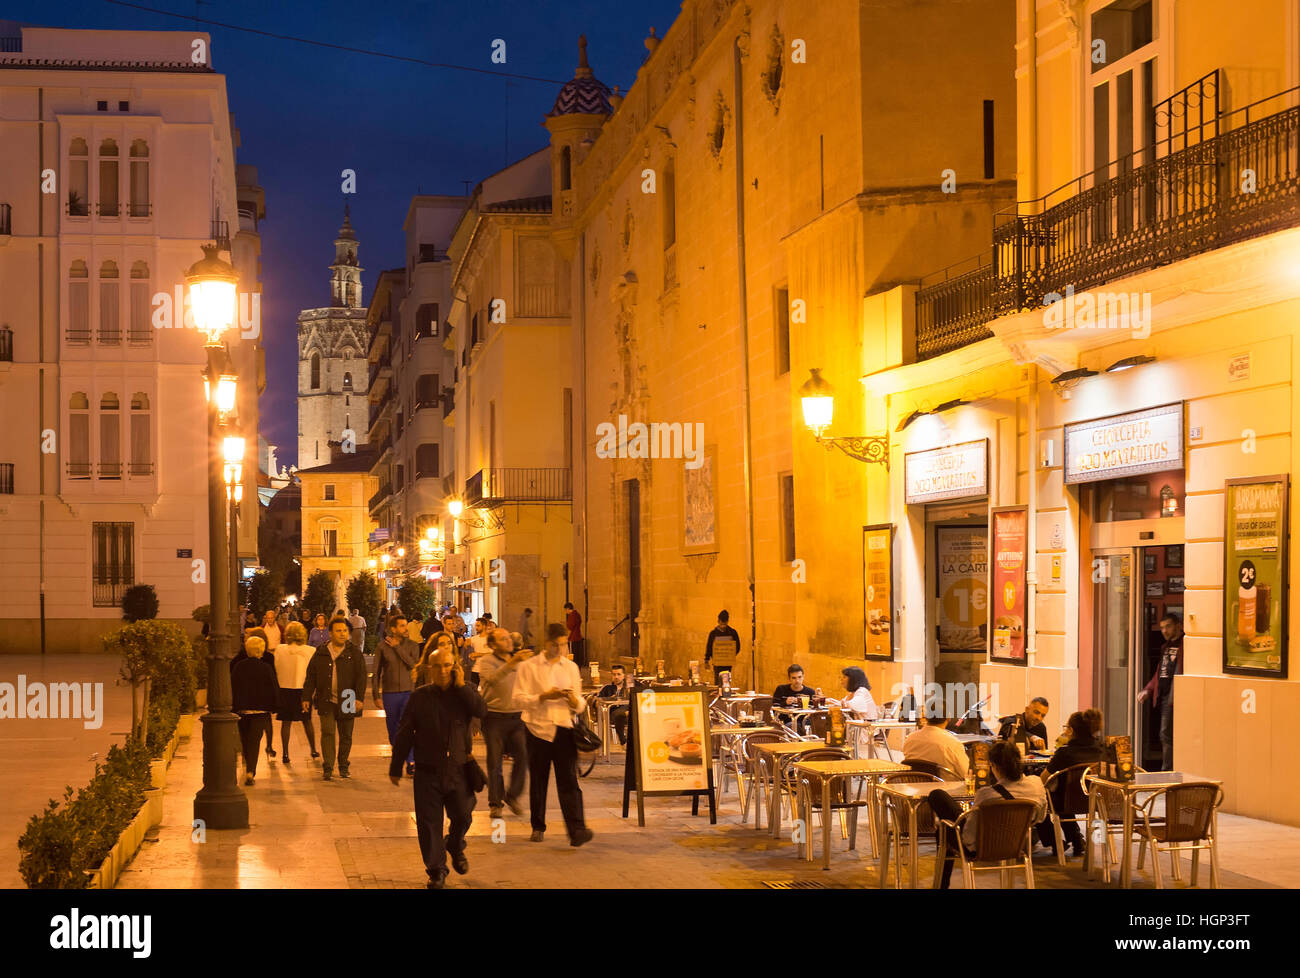 People walking and sitting in a restaurant on Old Town street of Valencia. Valencia is the 3rd largest city in Spain. Stock Photo